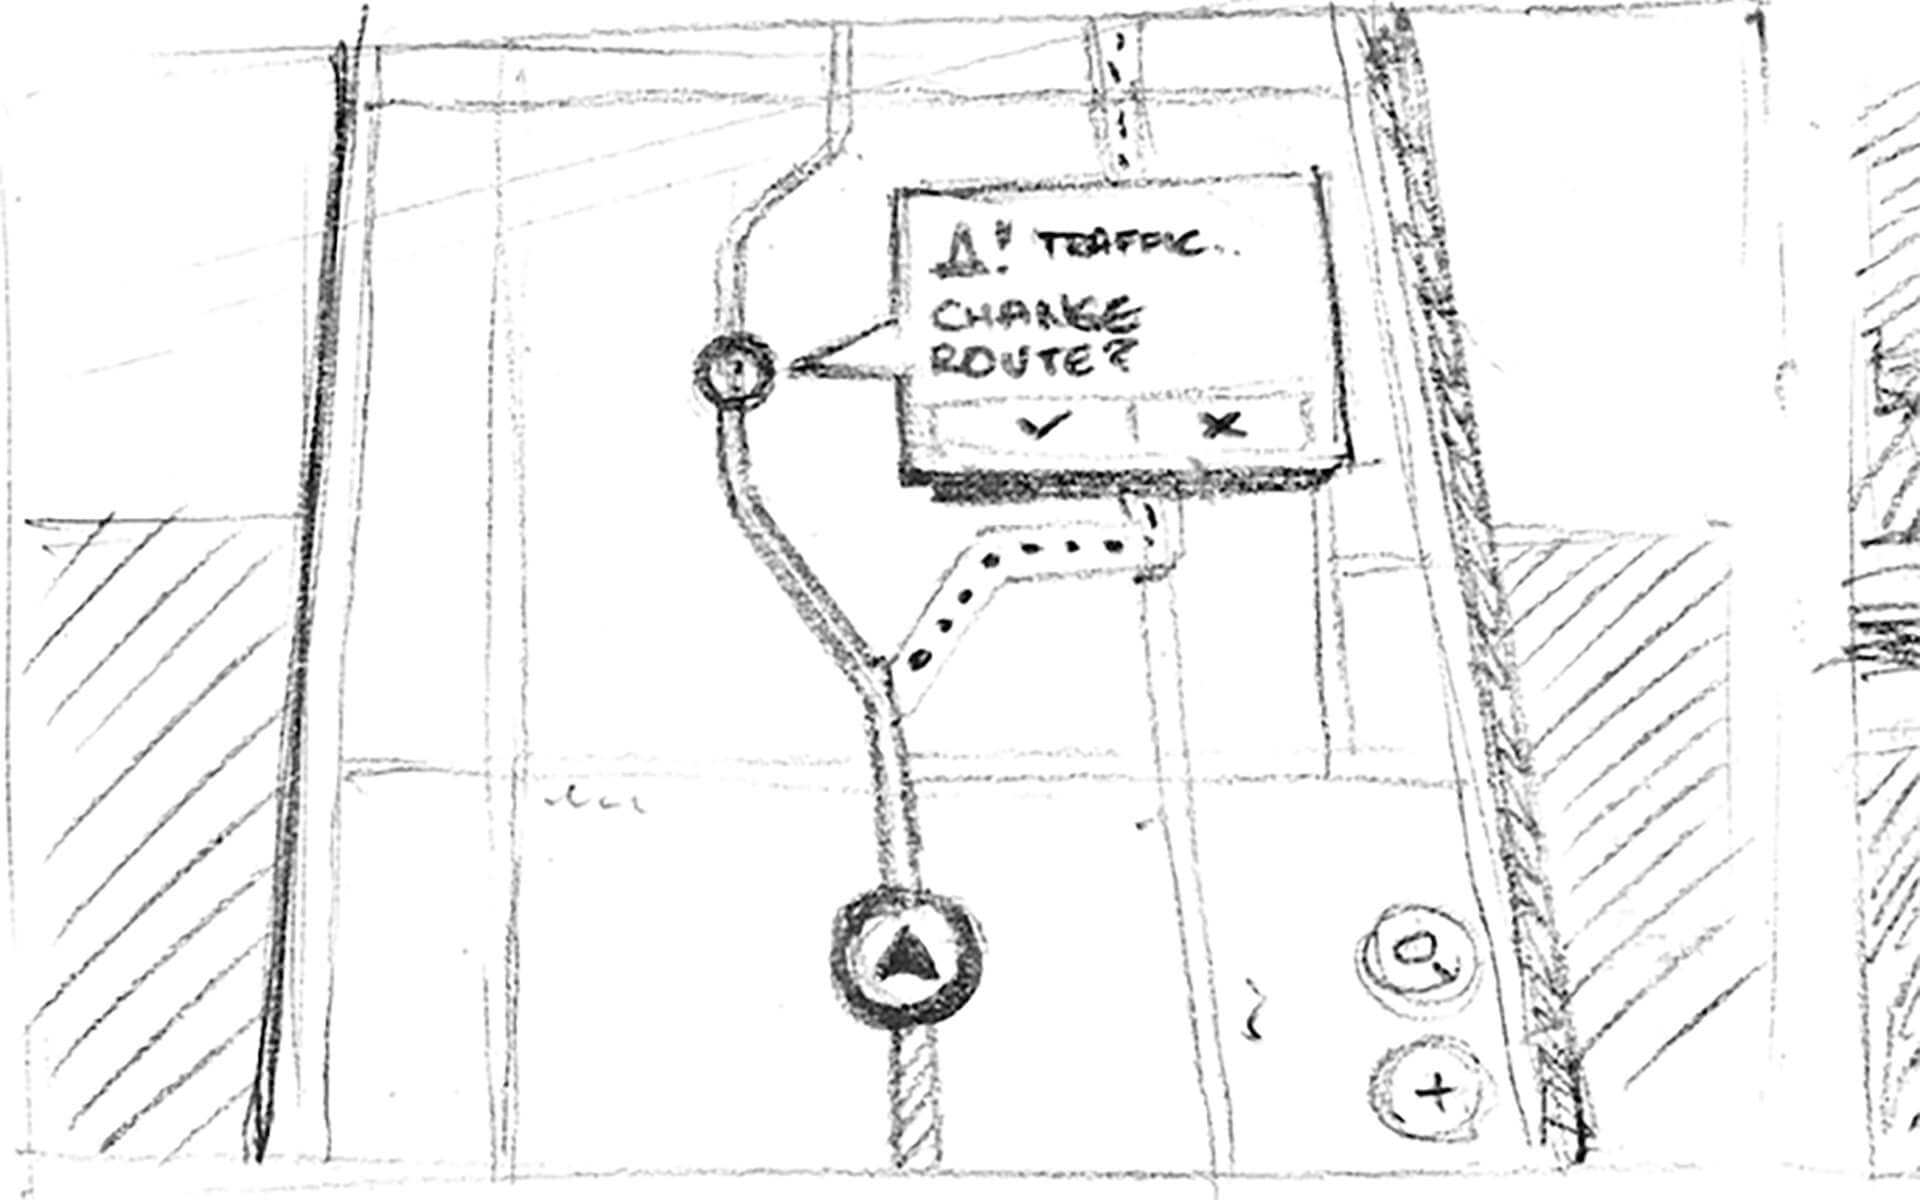 Sketch of route notification on display